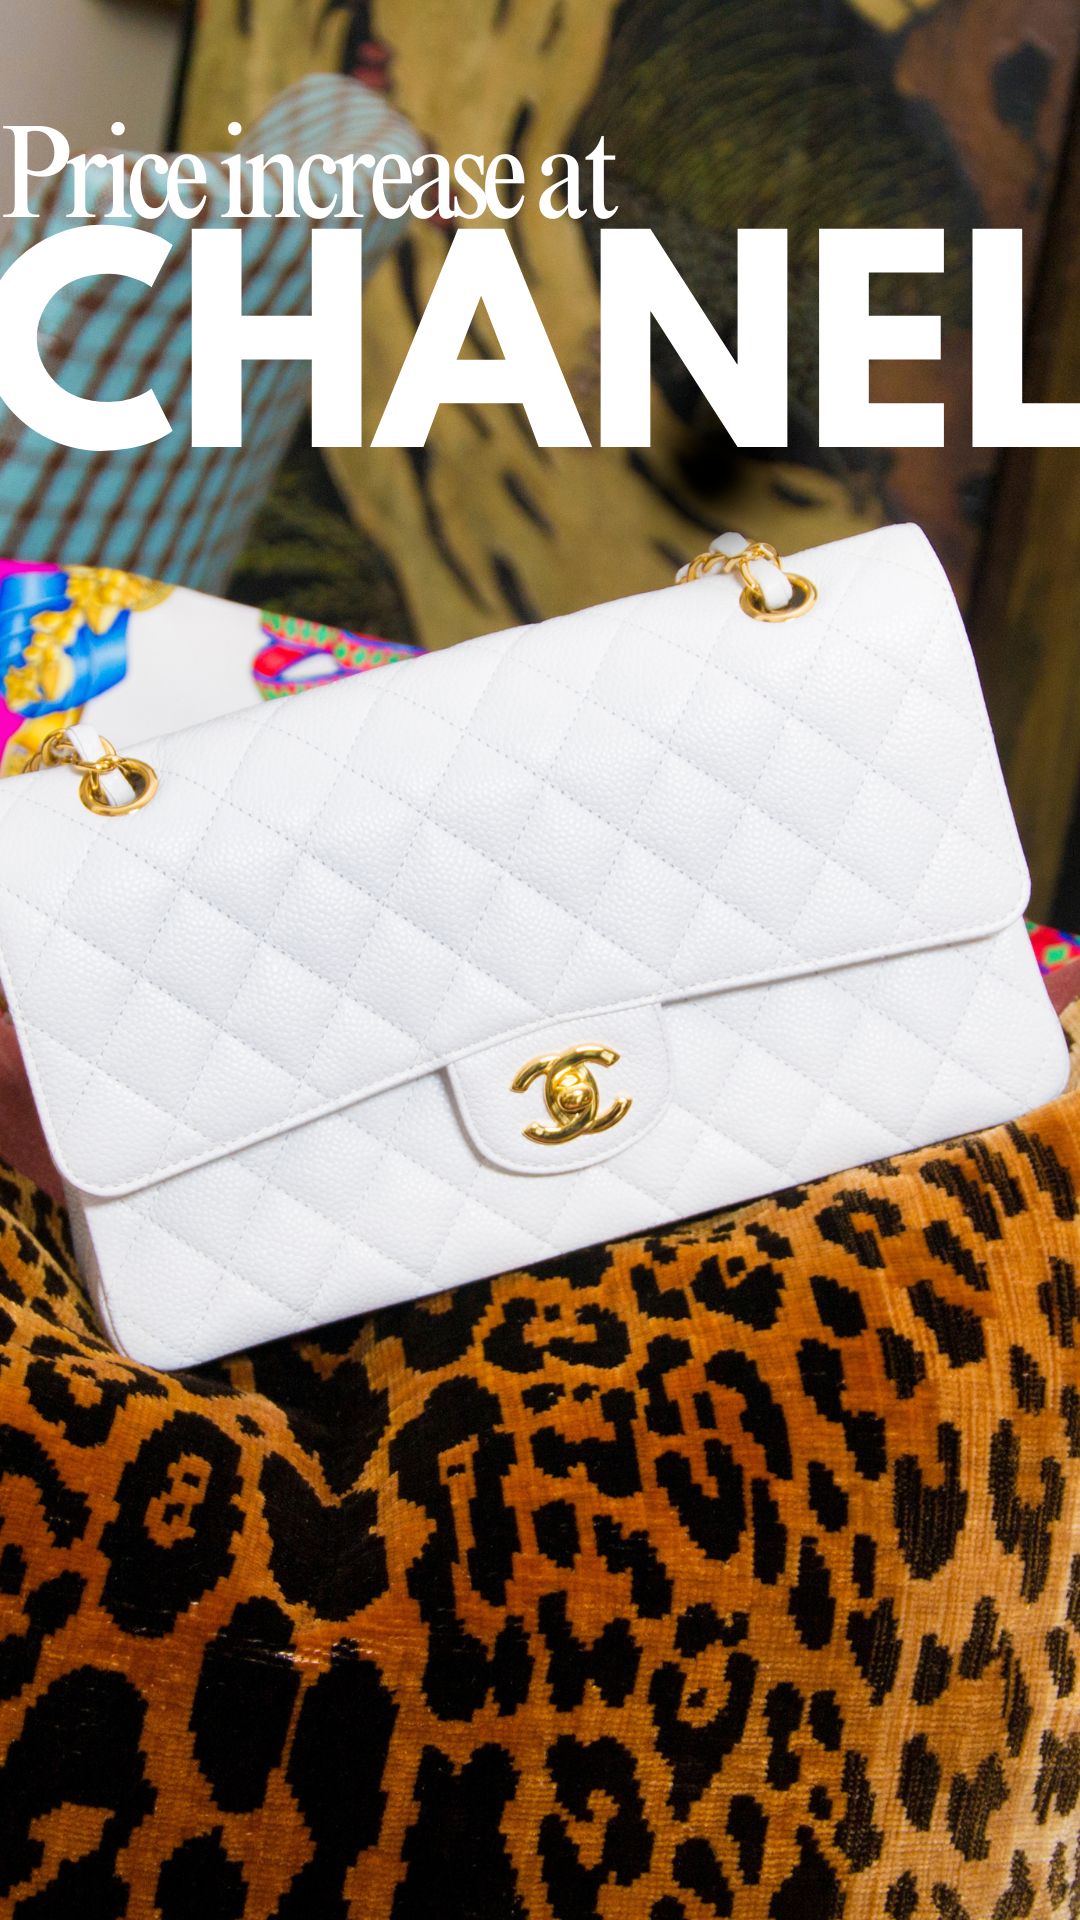 Investment bags: prices rising again at Chanel